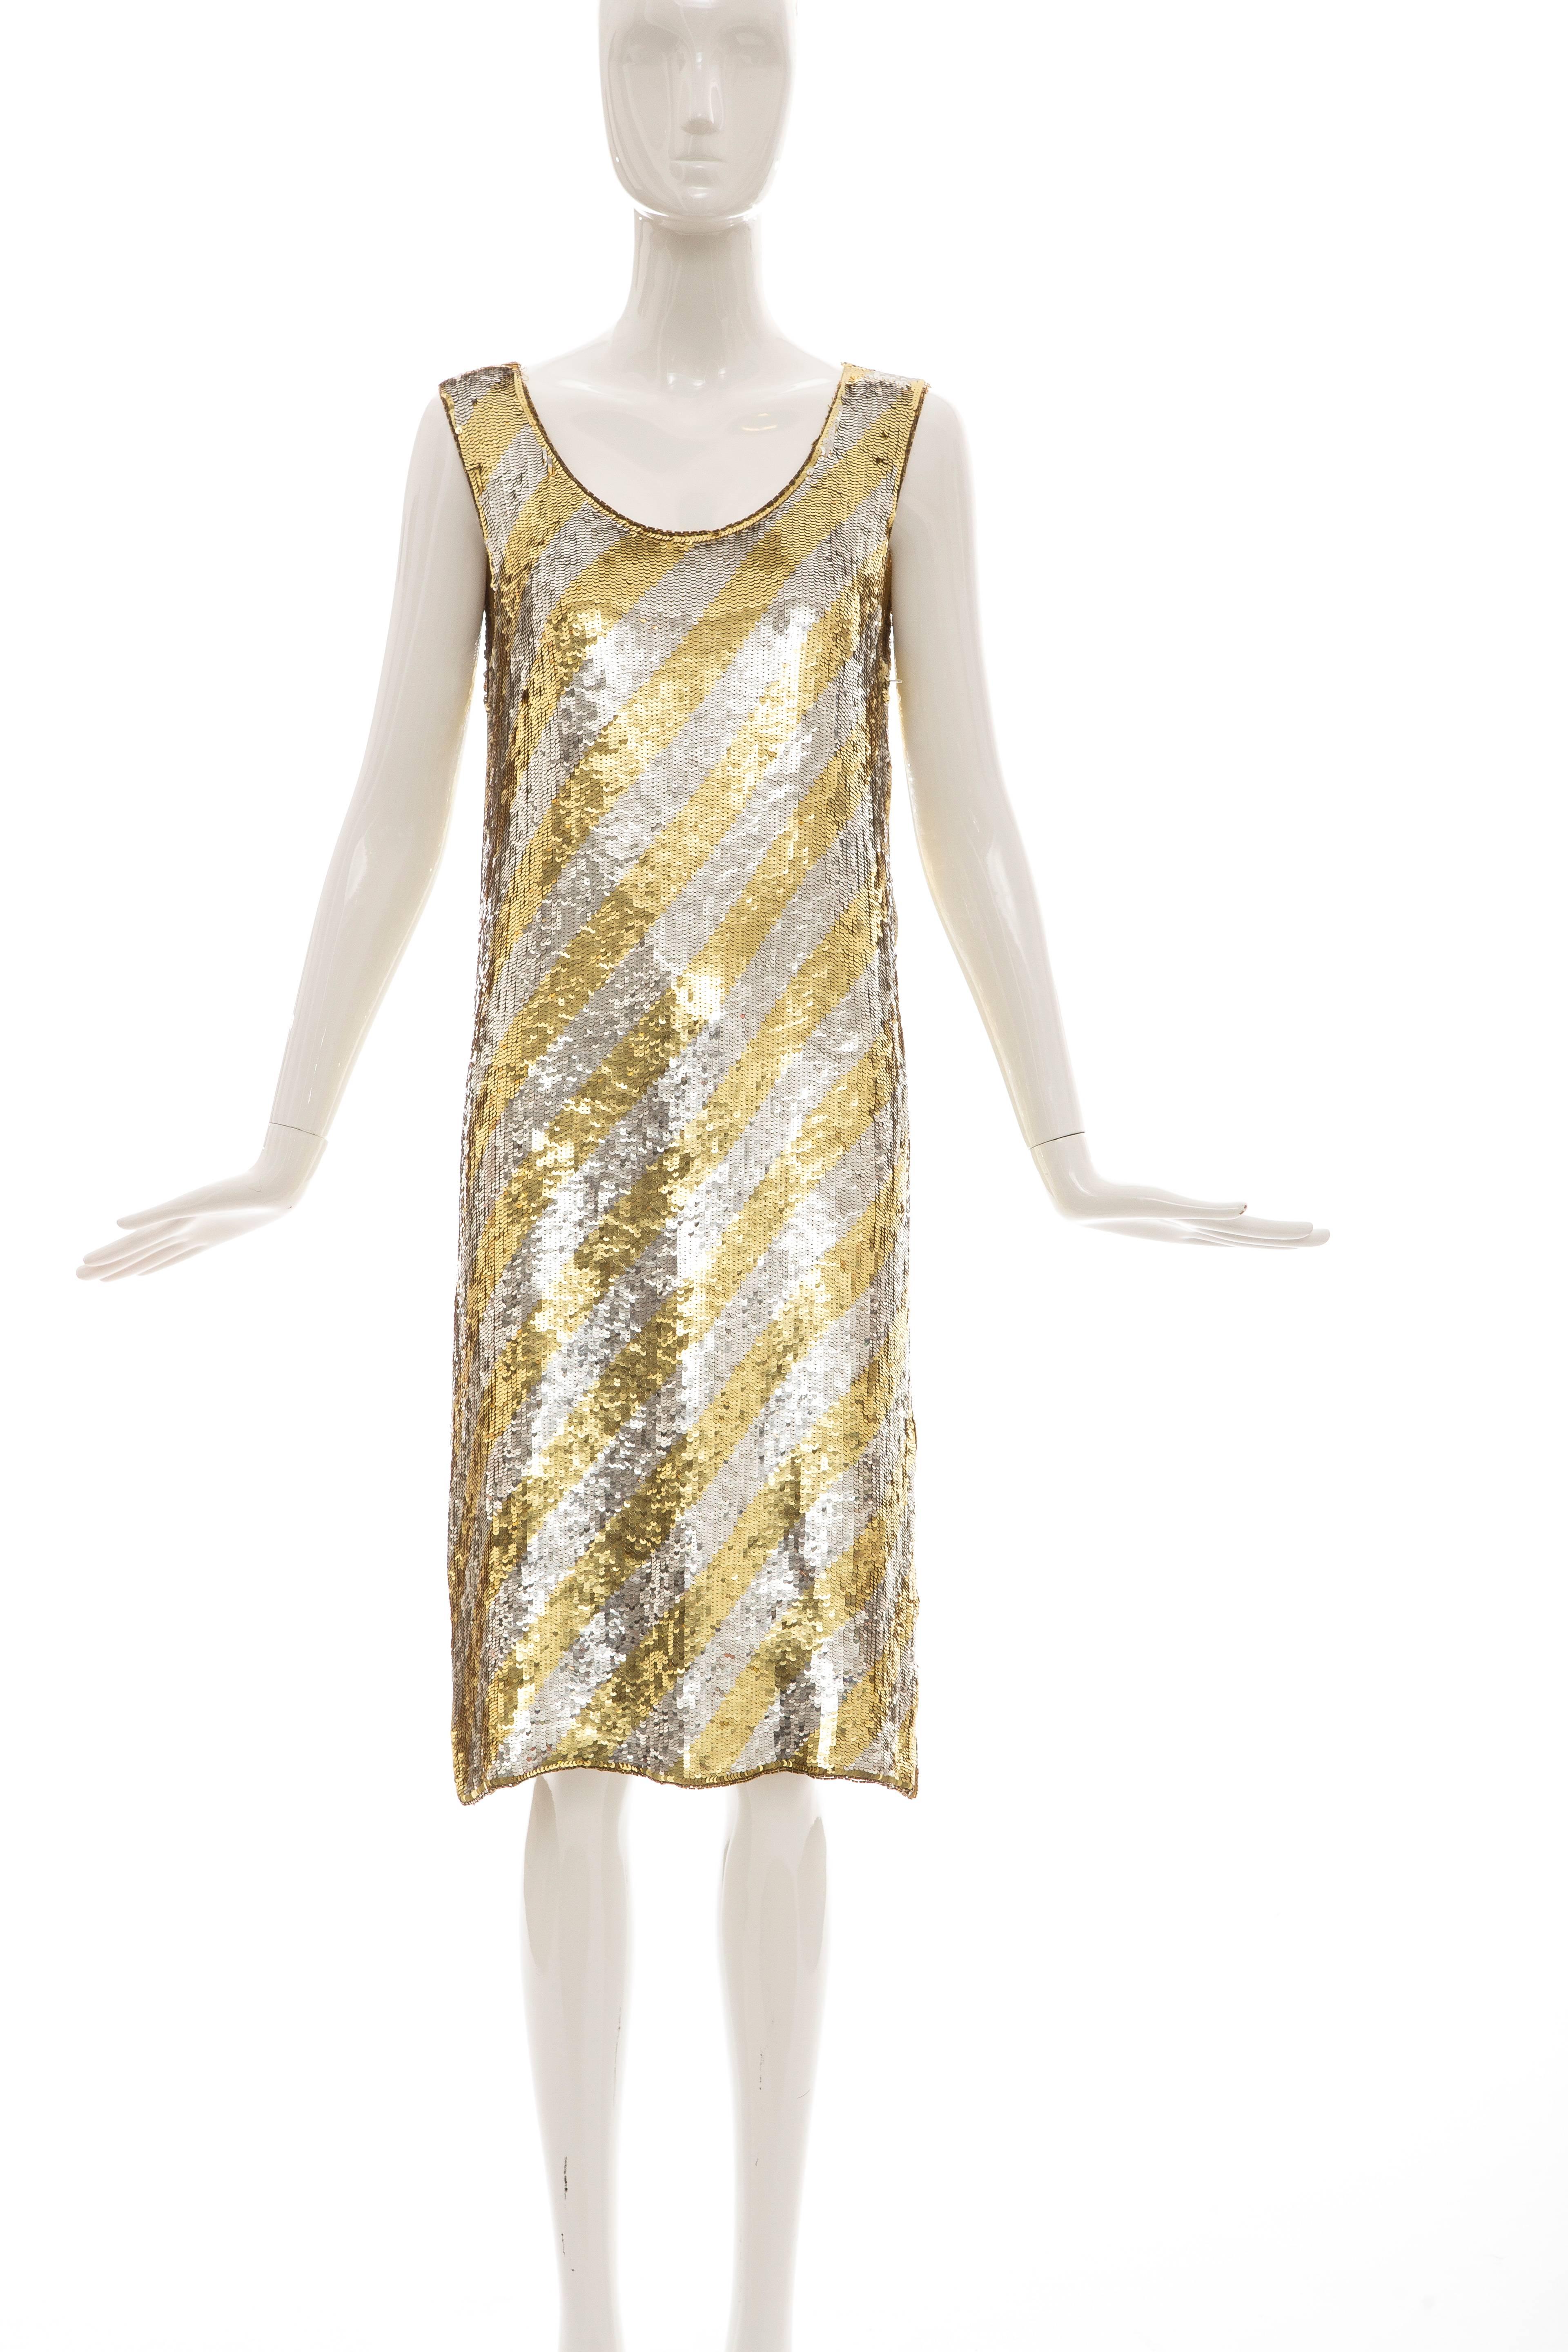 Christian Dior by Marc Bohan, circa 1970's, sleeveless shift dress with diagonal stripe embroidery of gold and silver sequins, side zip and fully lined.

Bust: 36, Waist: 34, Length: 40.5